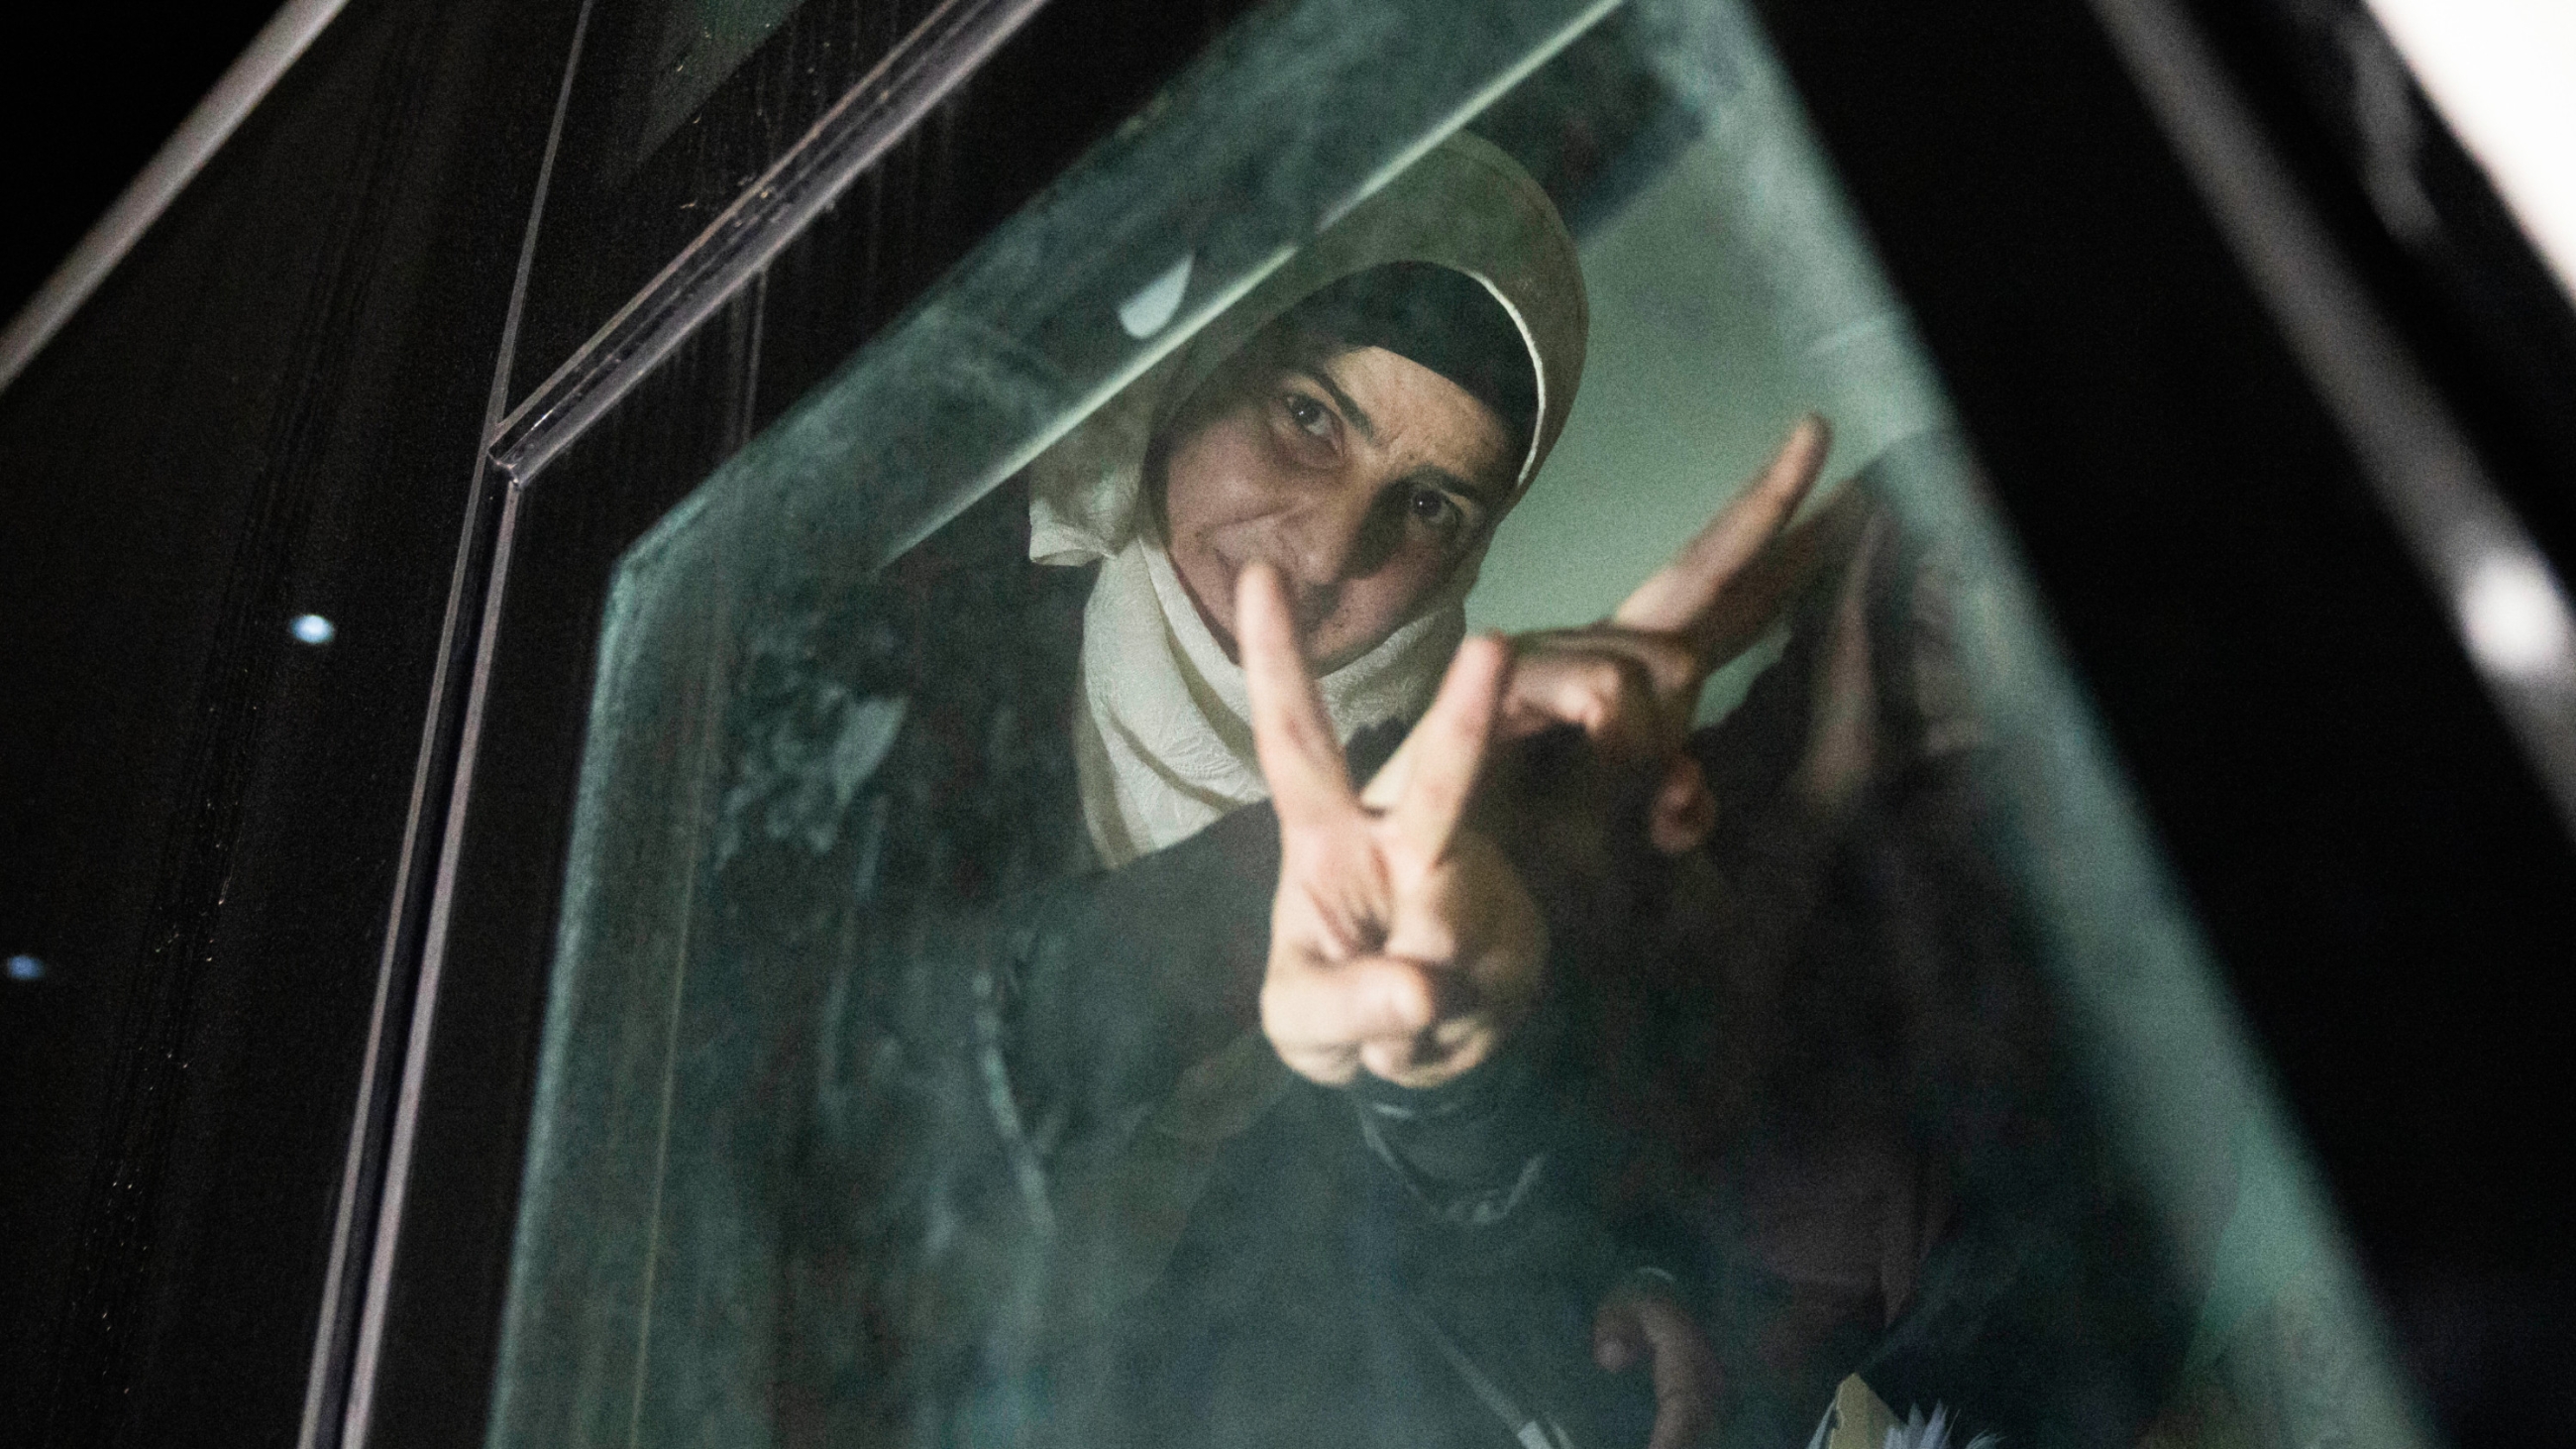 Palestinian women flash the "V" sign inside their transportation upon their arrival in the West Bank after being freed from Israeli jail on 24 November 2023 (AP)